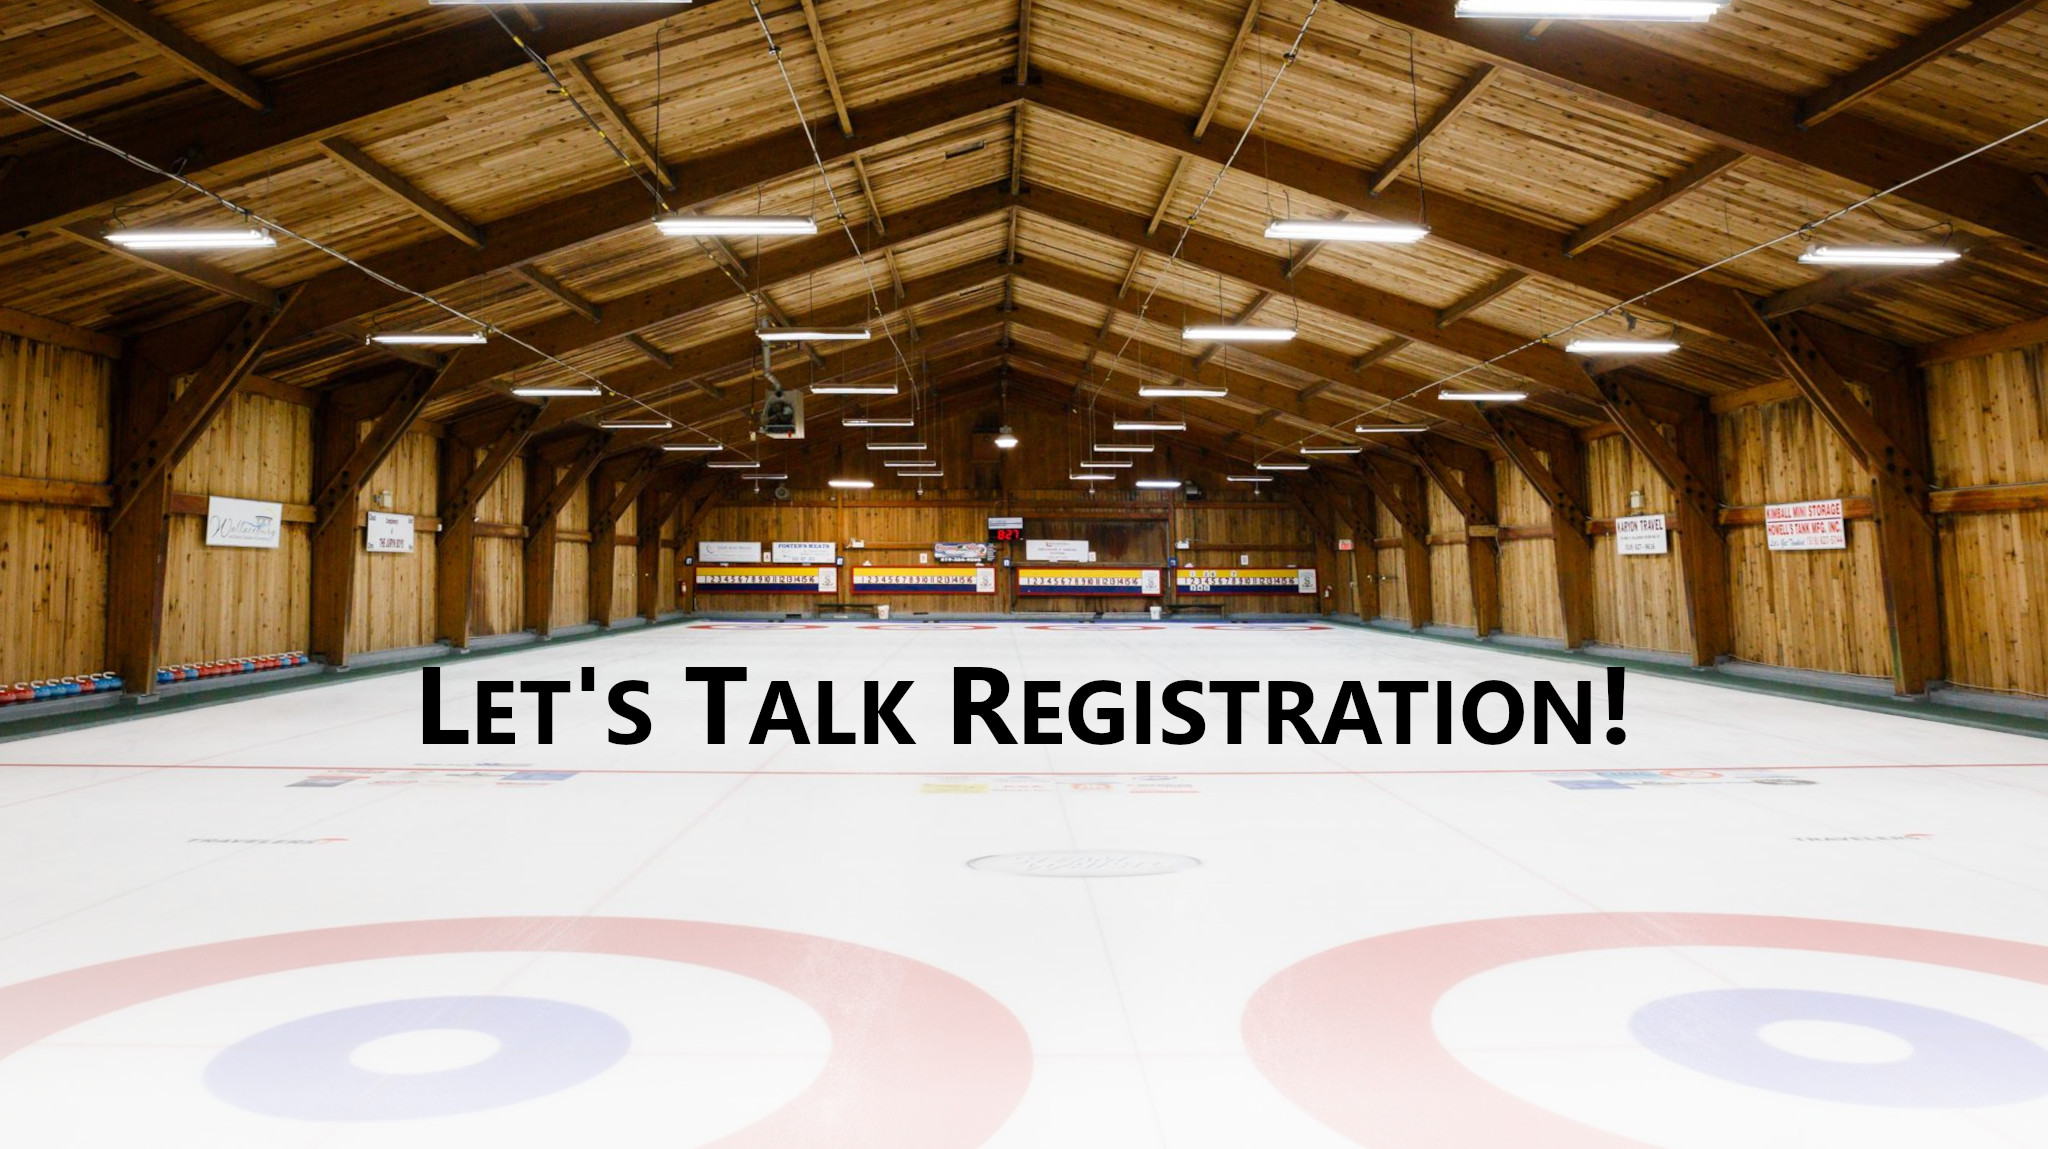 Sydenham Community Curling Club rink with the text "Let's Talk Registration" overlayed.